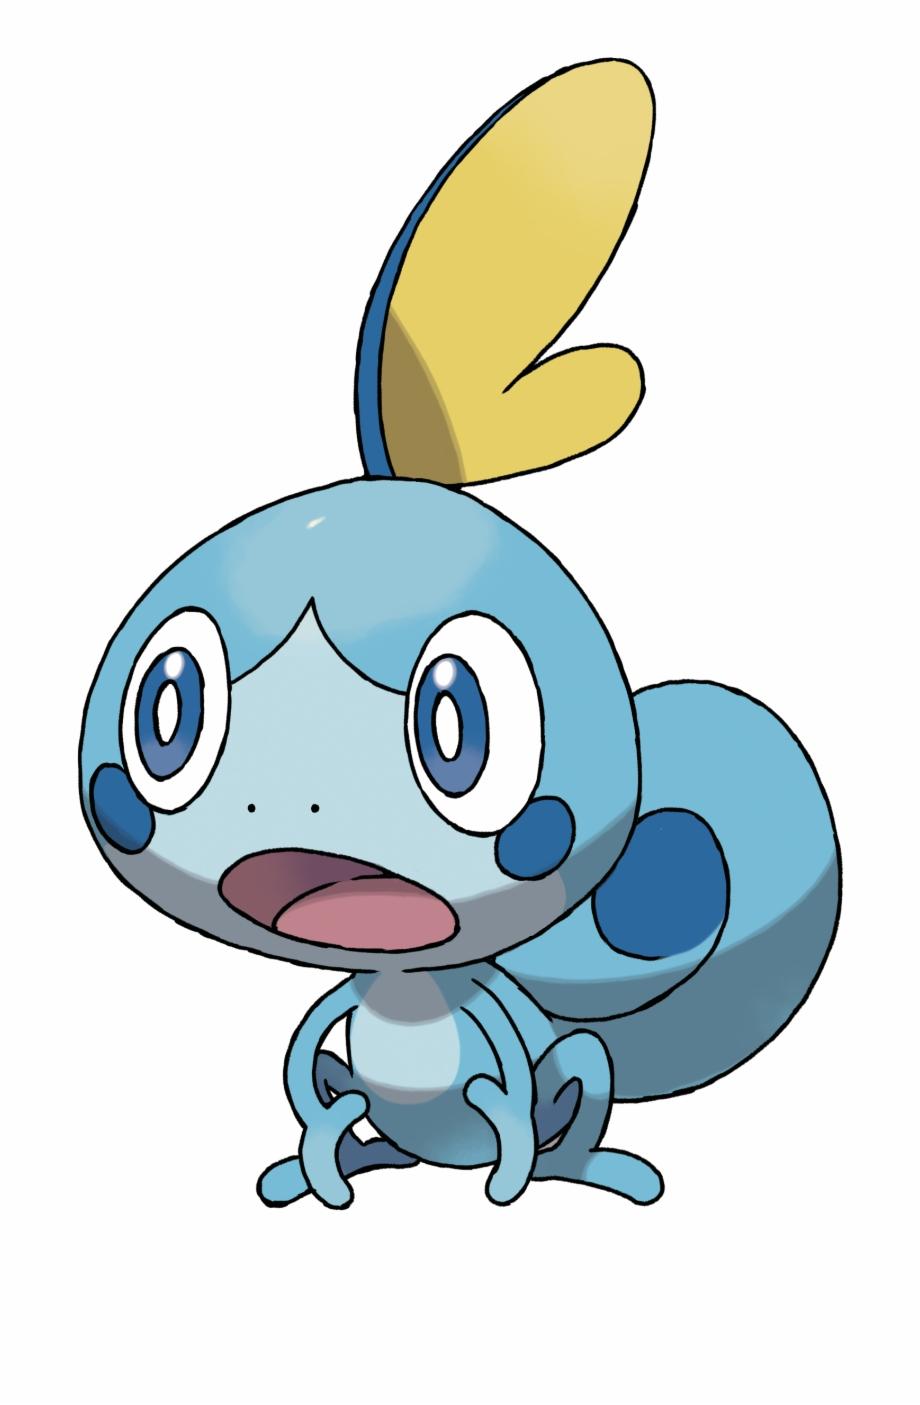 Grid View Sword And Shield Sobble Free PNG Image